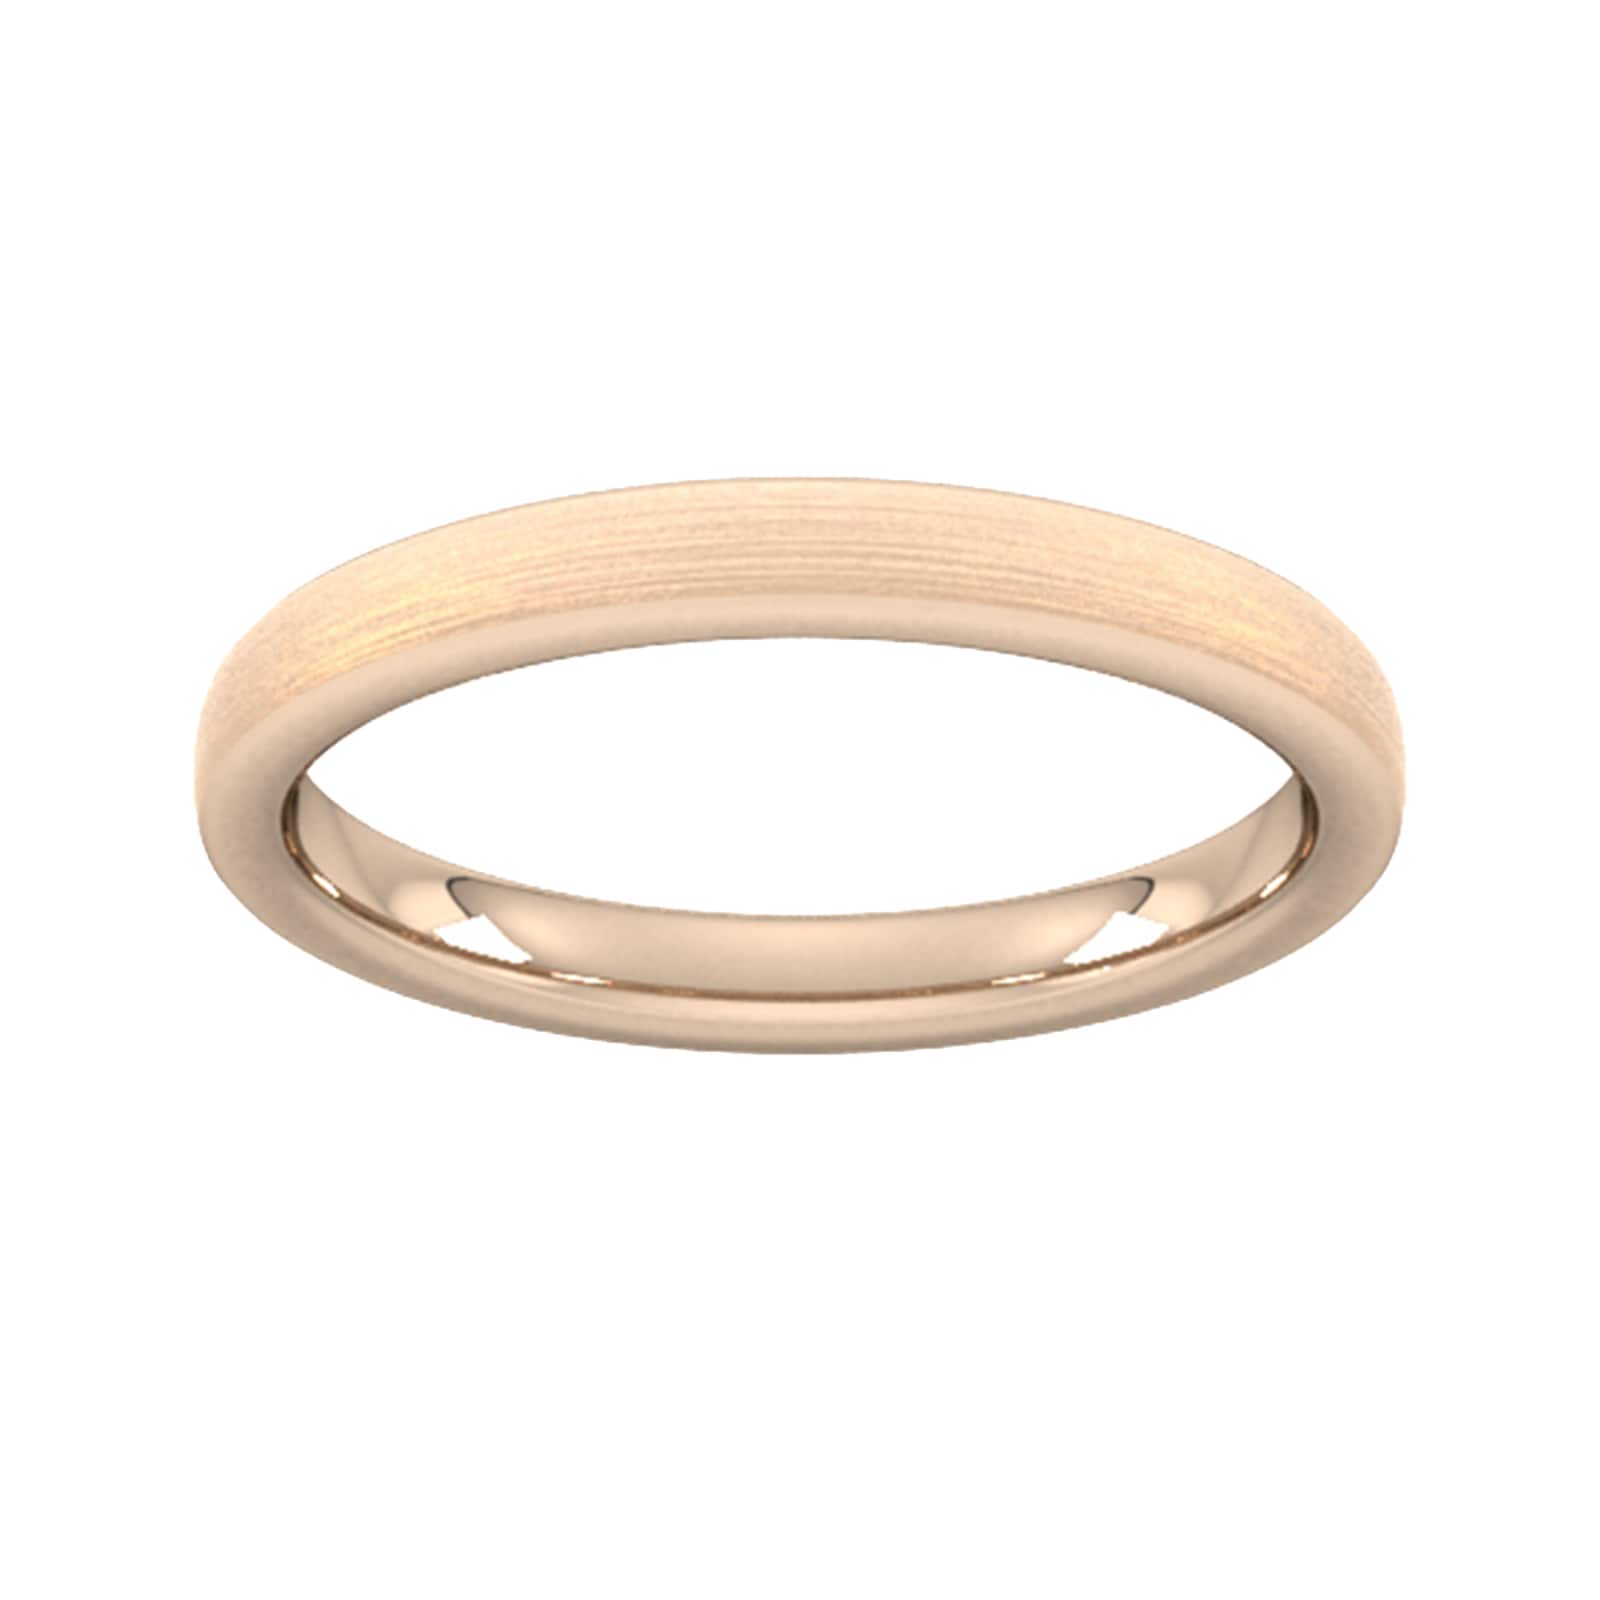 2.5mm D Shape Standard Polished Chamfered Edges With Matt Centre Wedding Ring In 9 Carat Rose Gold - Ring Size W